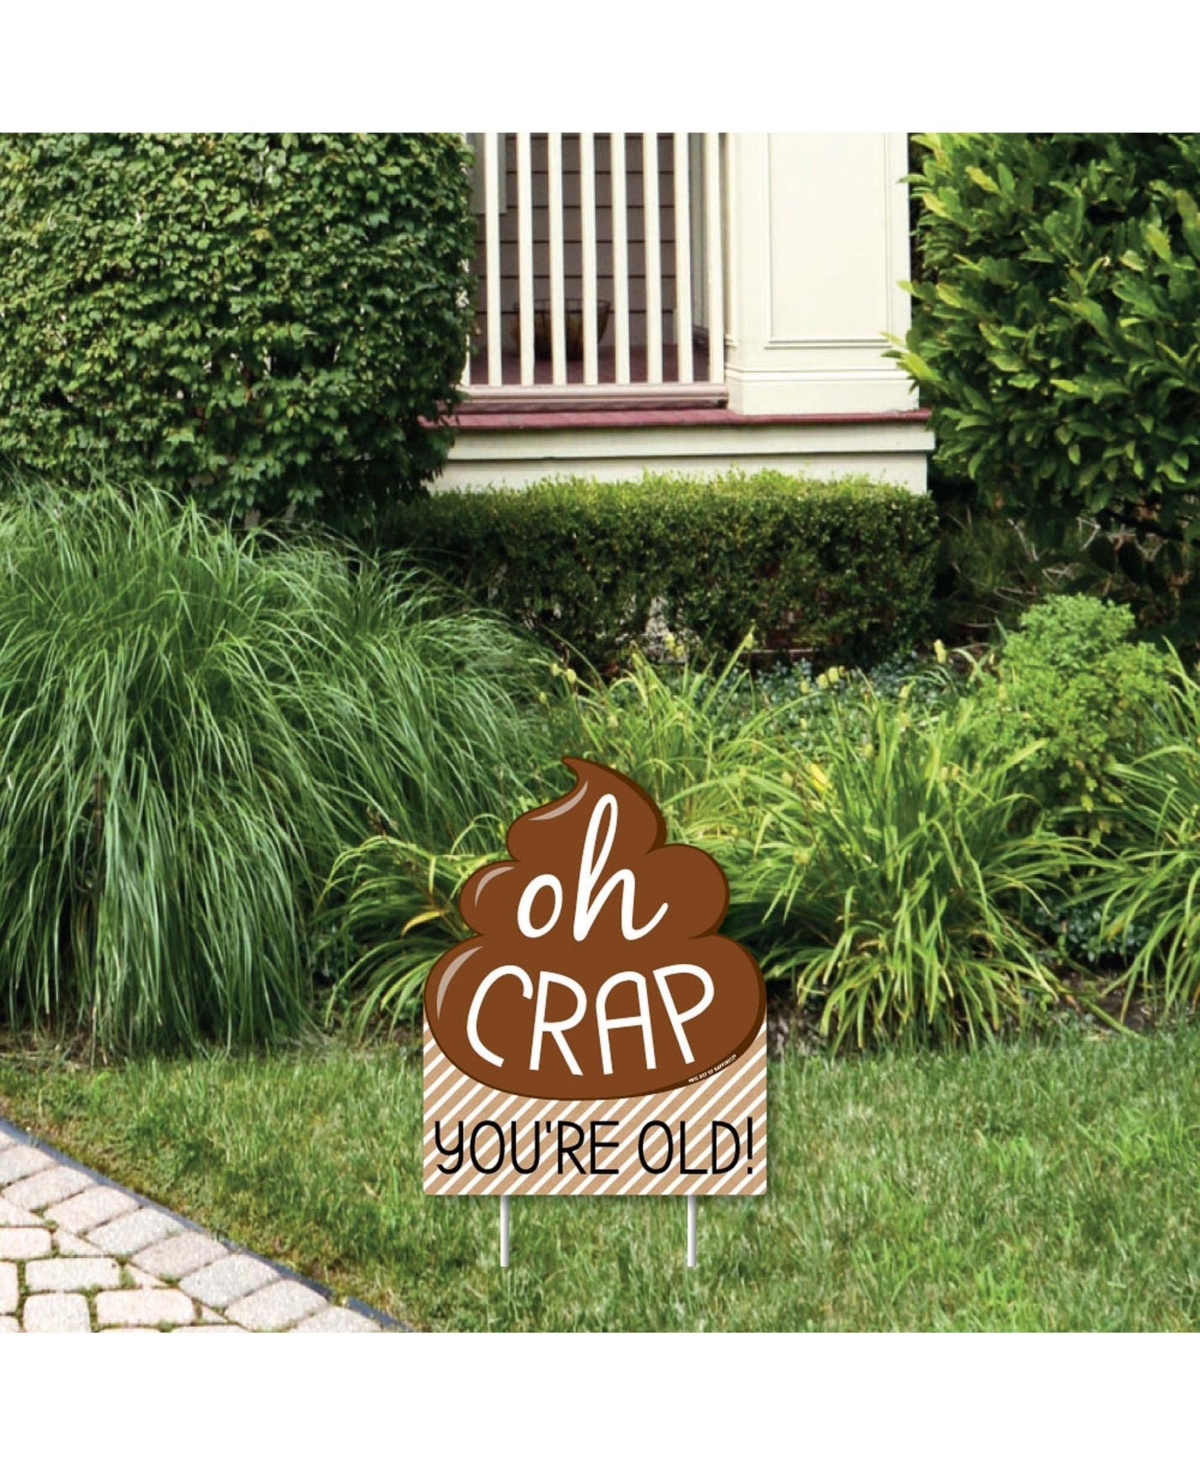 Oh Crap, Youre Old - Outdoor Lawn Sign - Poop Birthday Party Yard Sign - 1 Pc